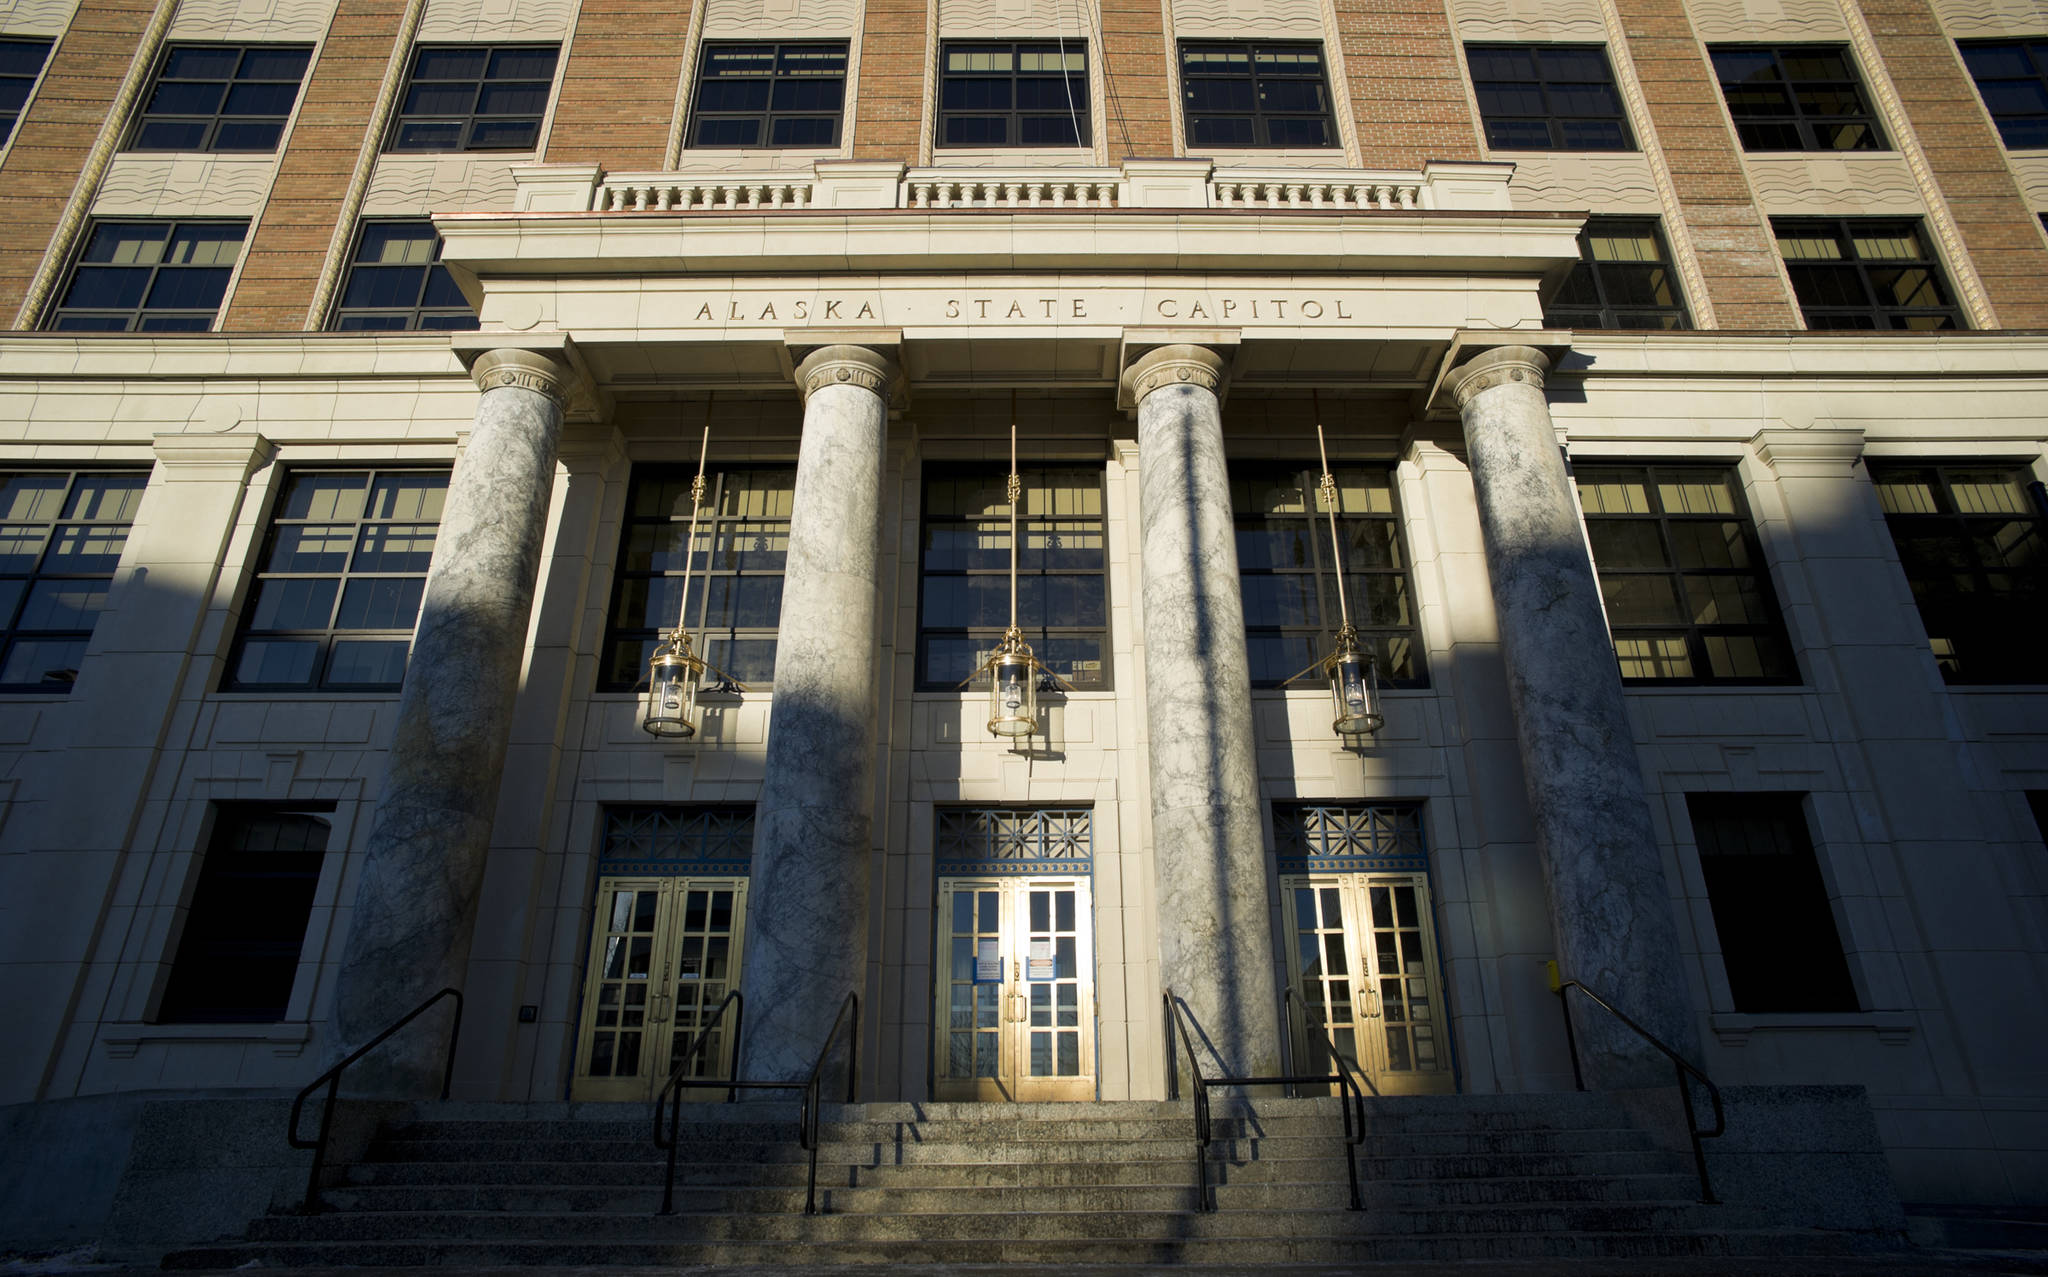 Sunlight exposes the front of the Alaska State Capitol building on Tuesday, Jan. 3, 2017. (Michael Penn | Juneau Empire)